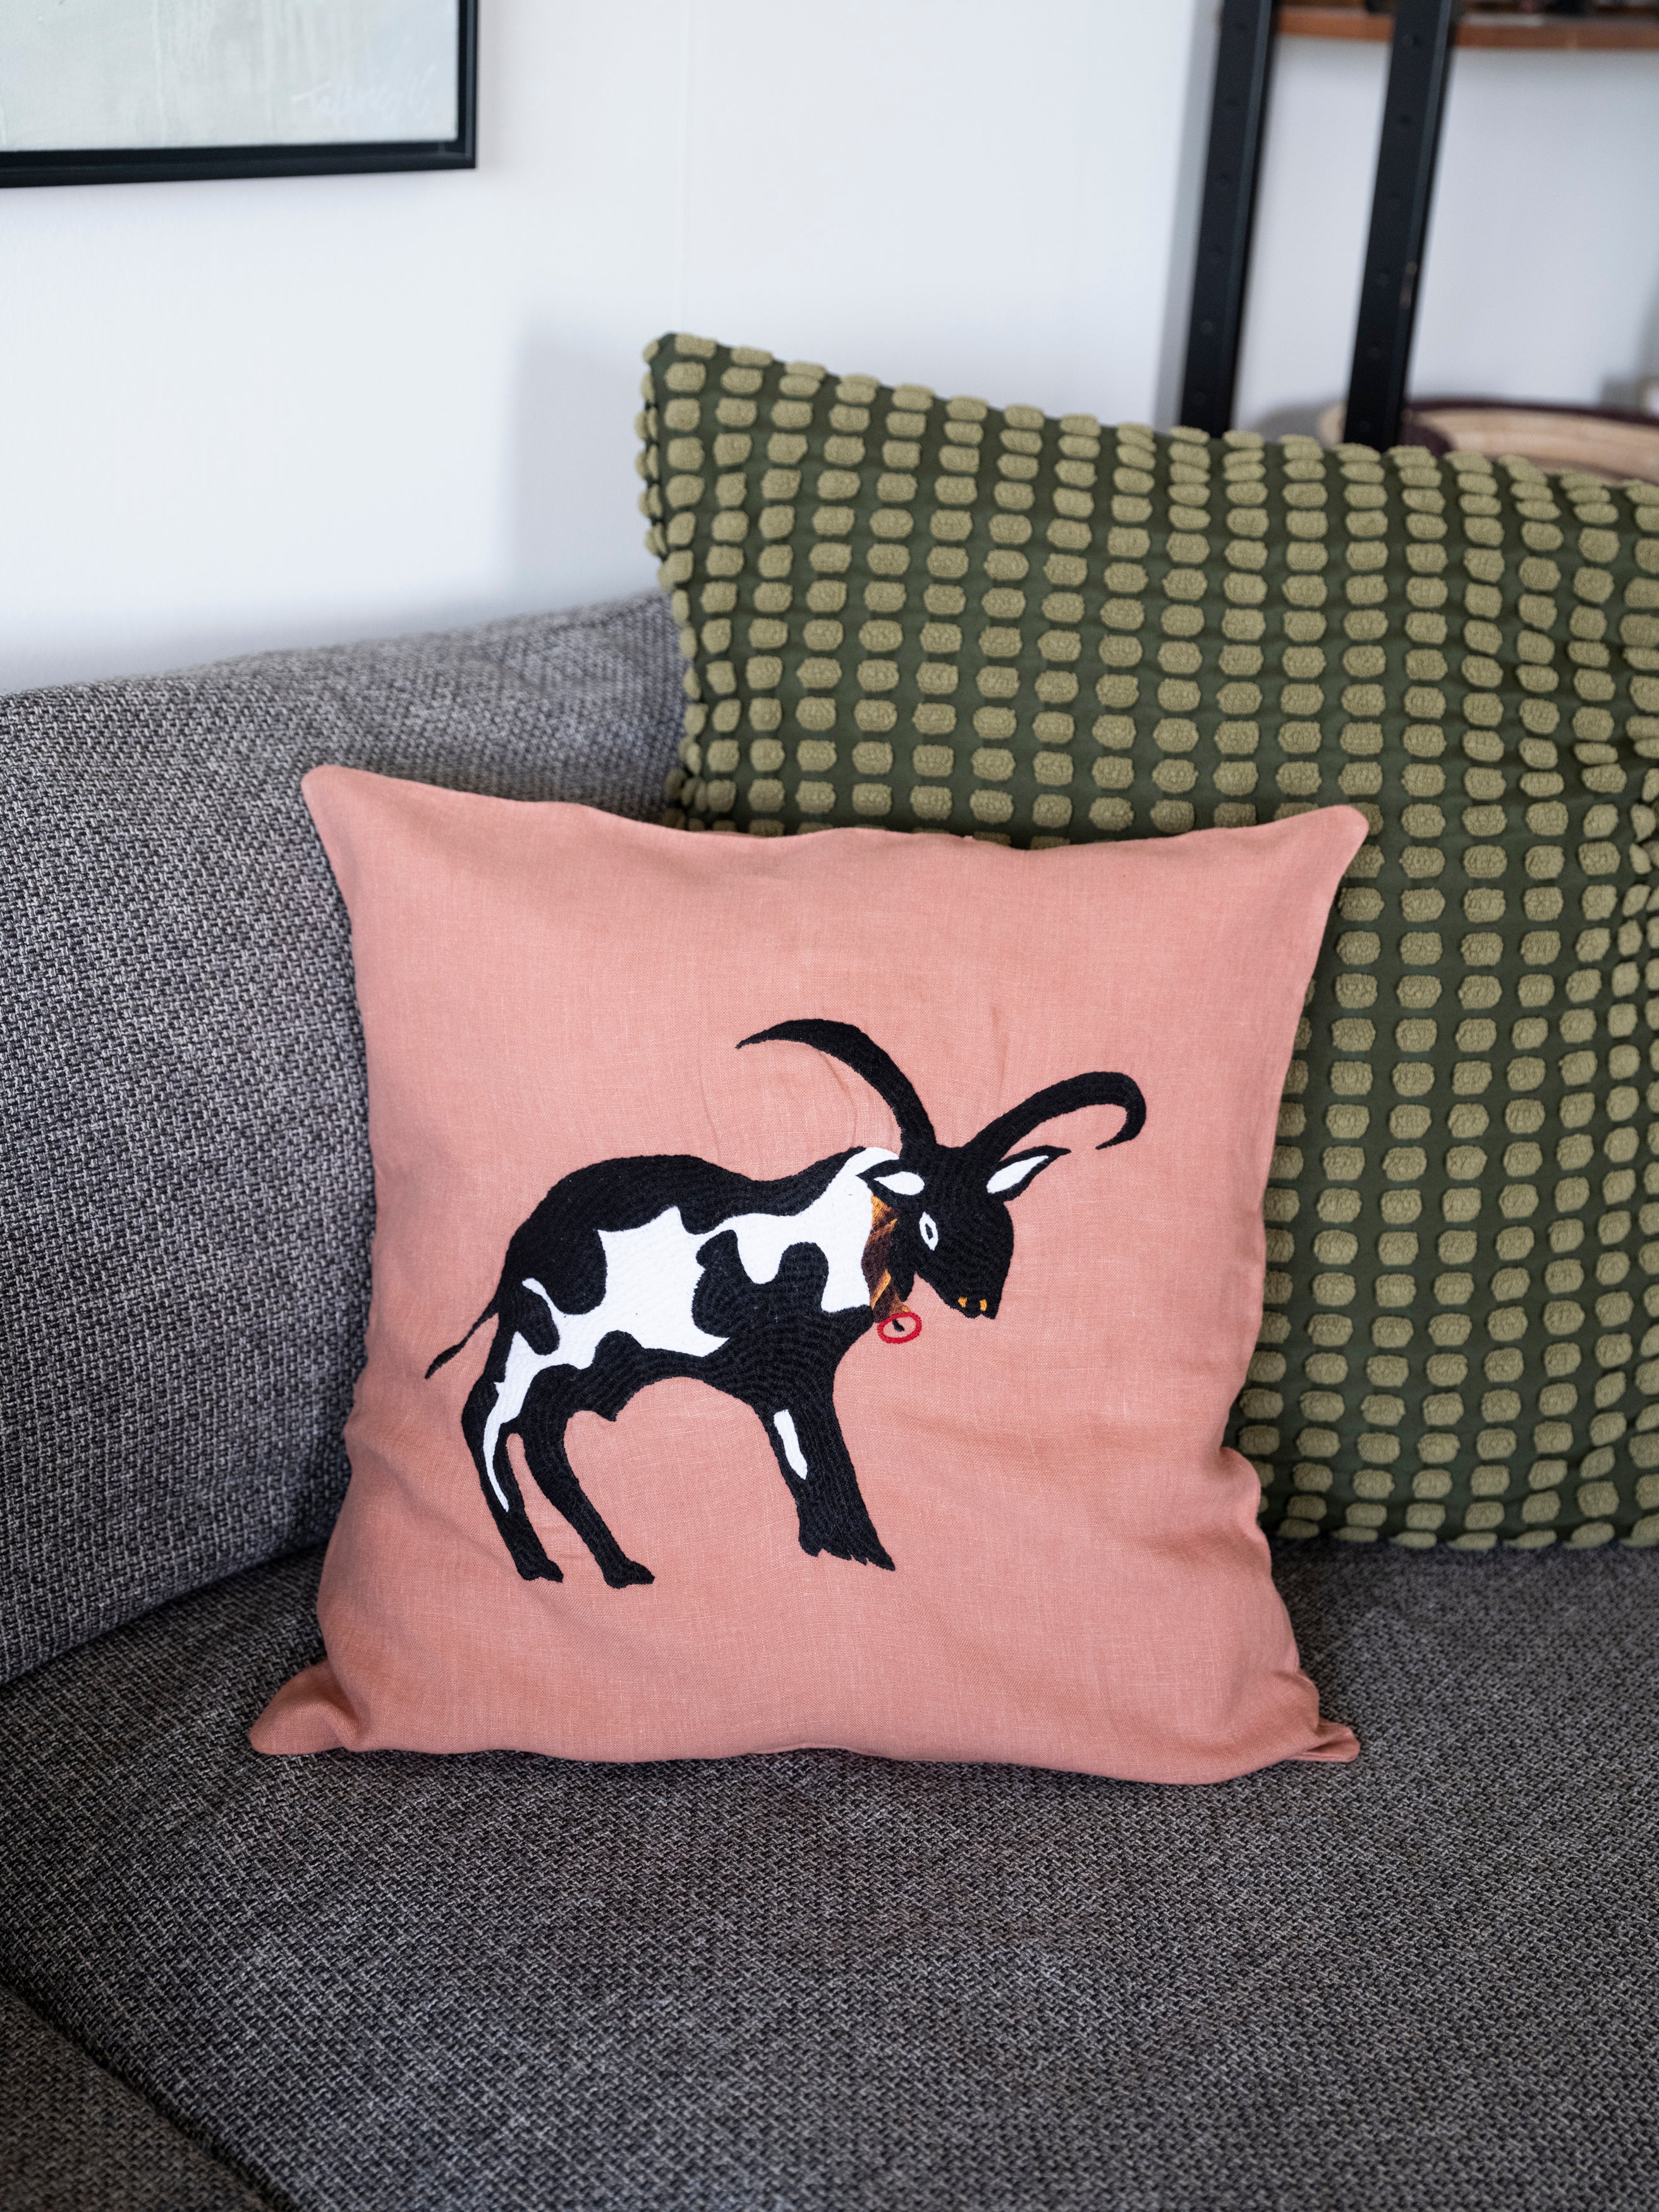 Cow pillow on pink linen